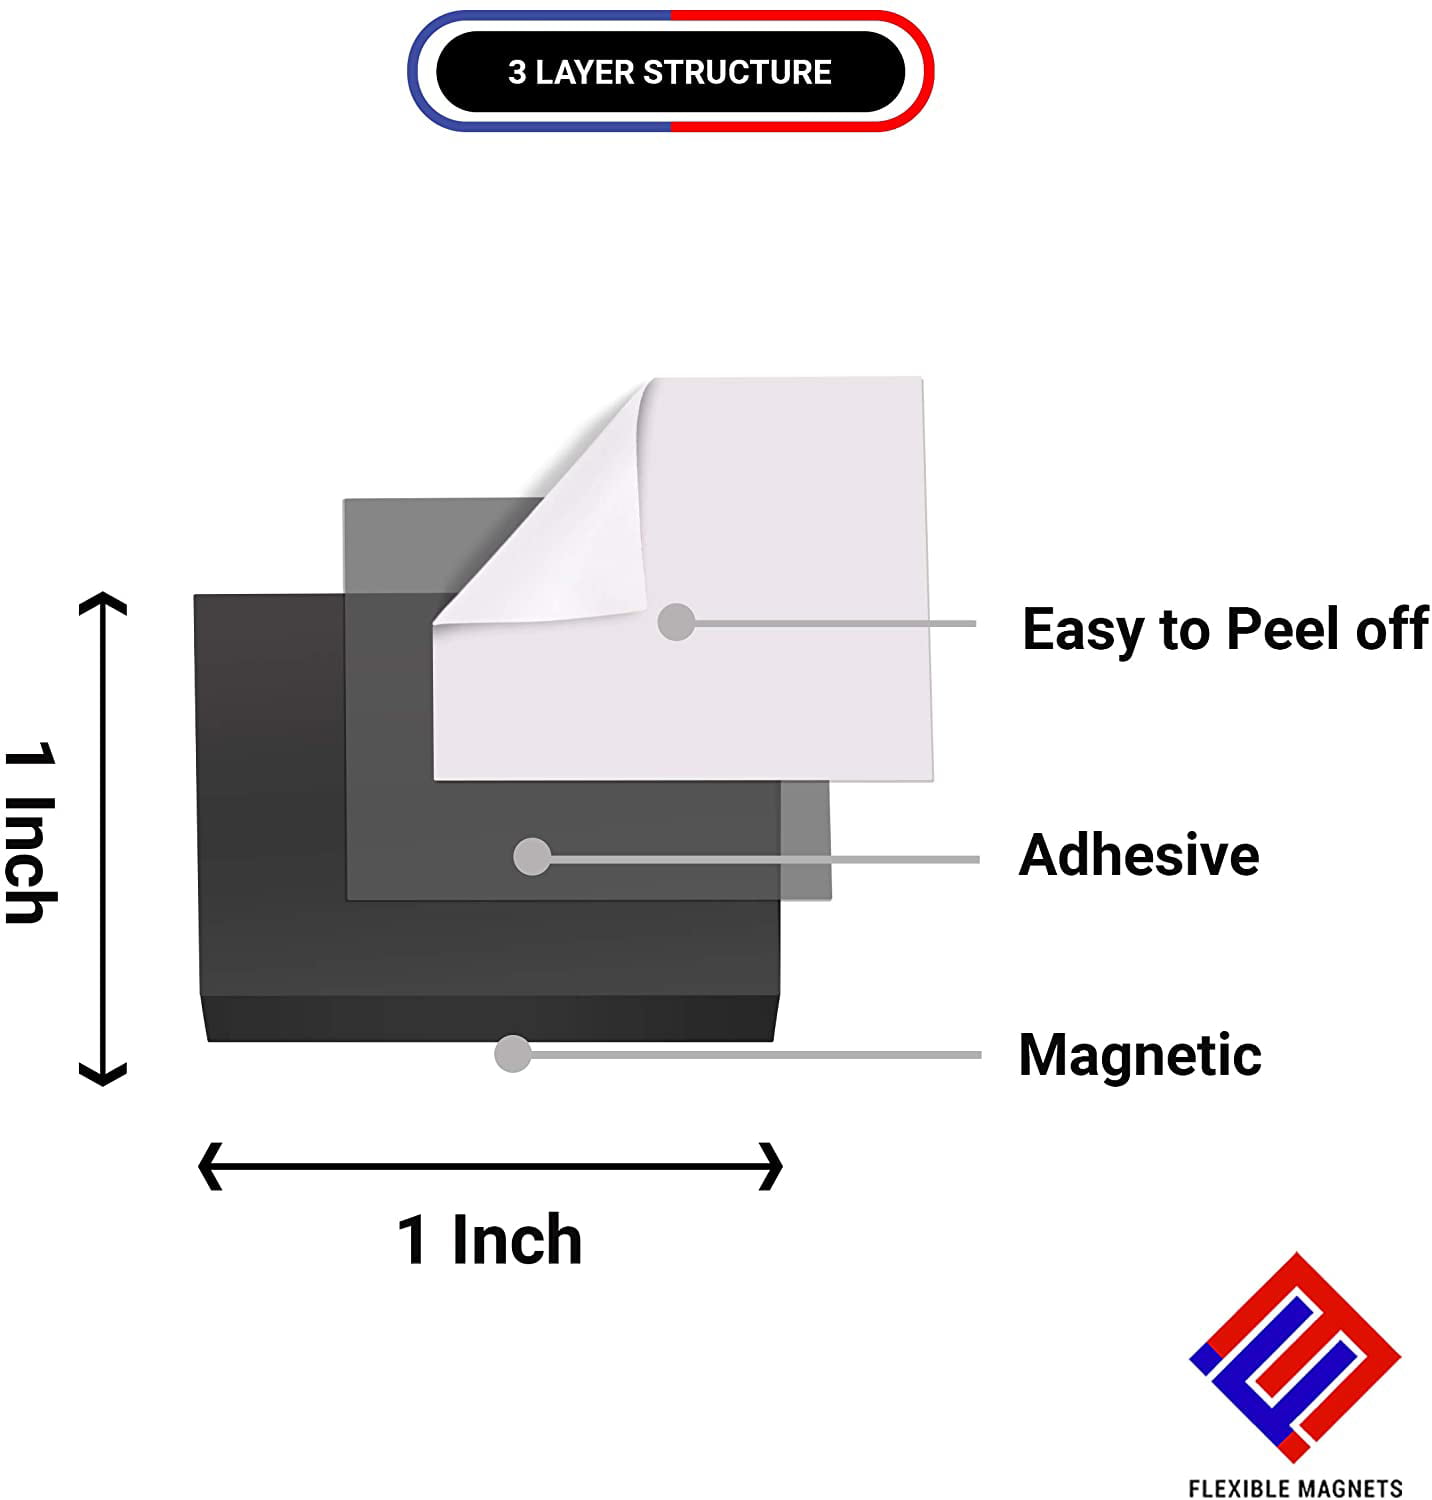 1 x 1 Self Adhesive Magnets - Pack of 25 - Small Squares - 60mil